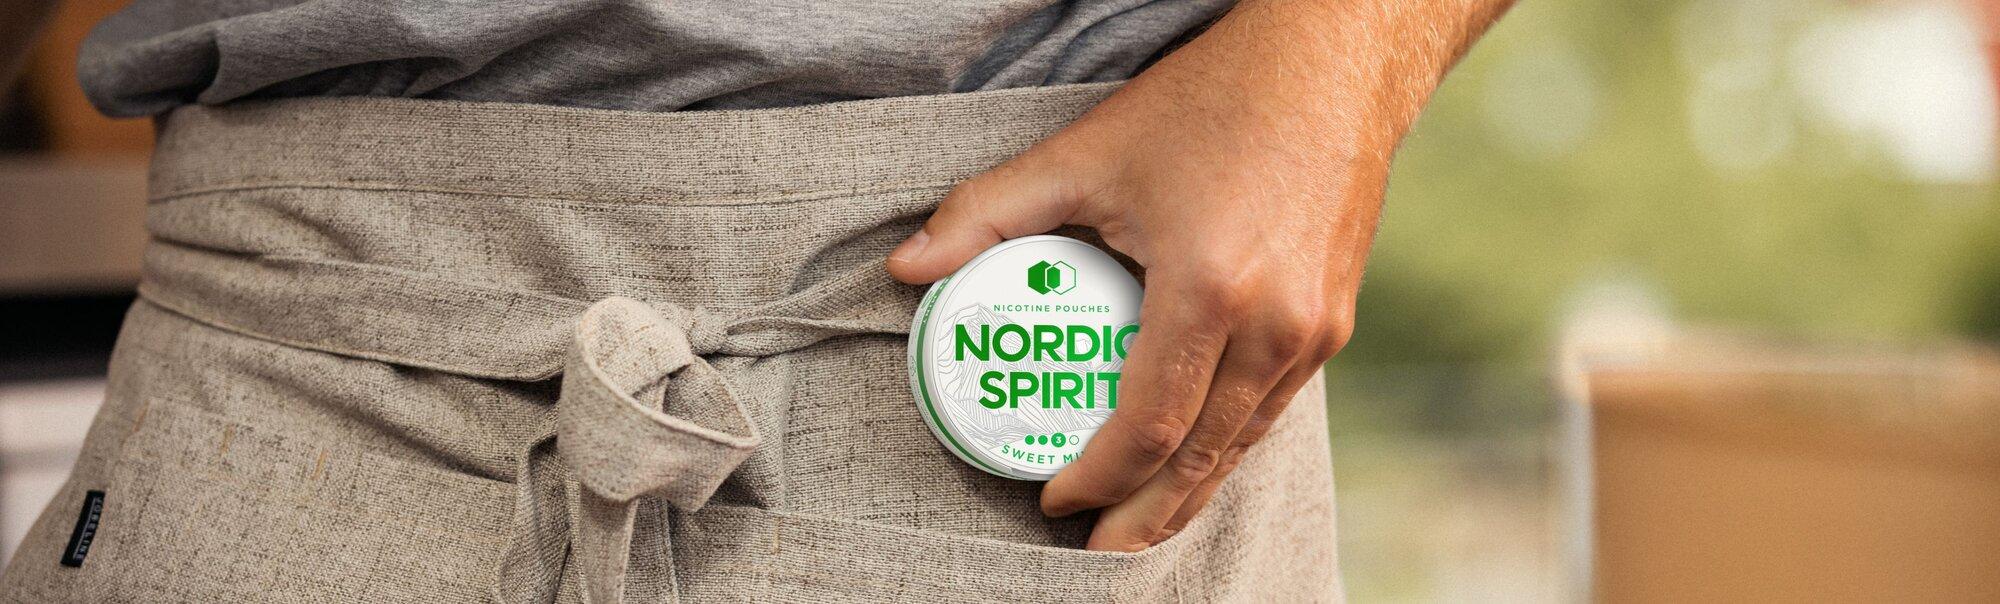 Find your Nordic Spirit Nicotine Pouches